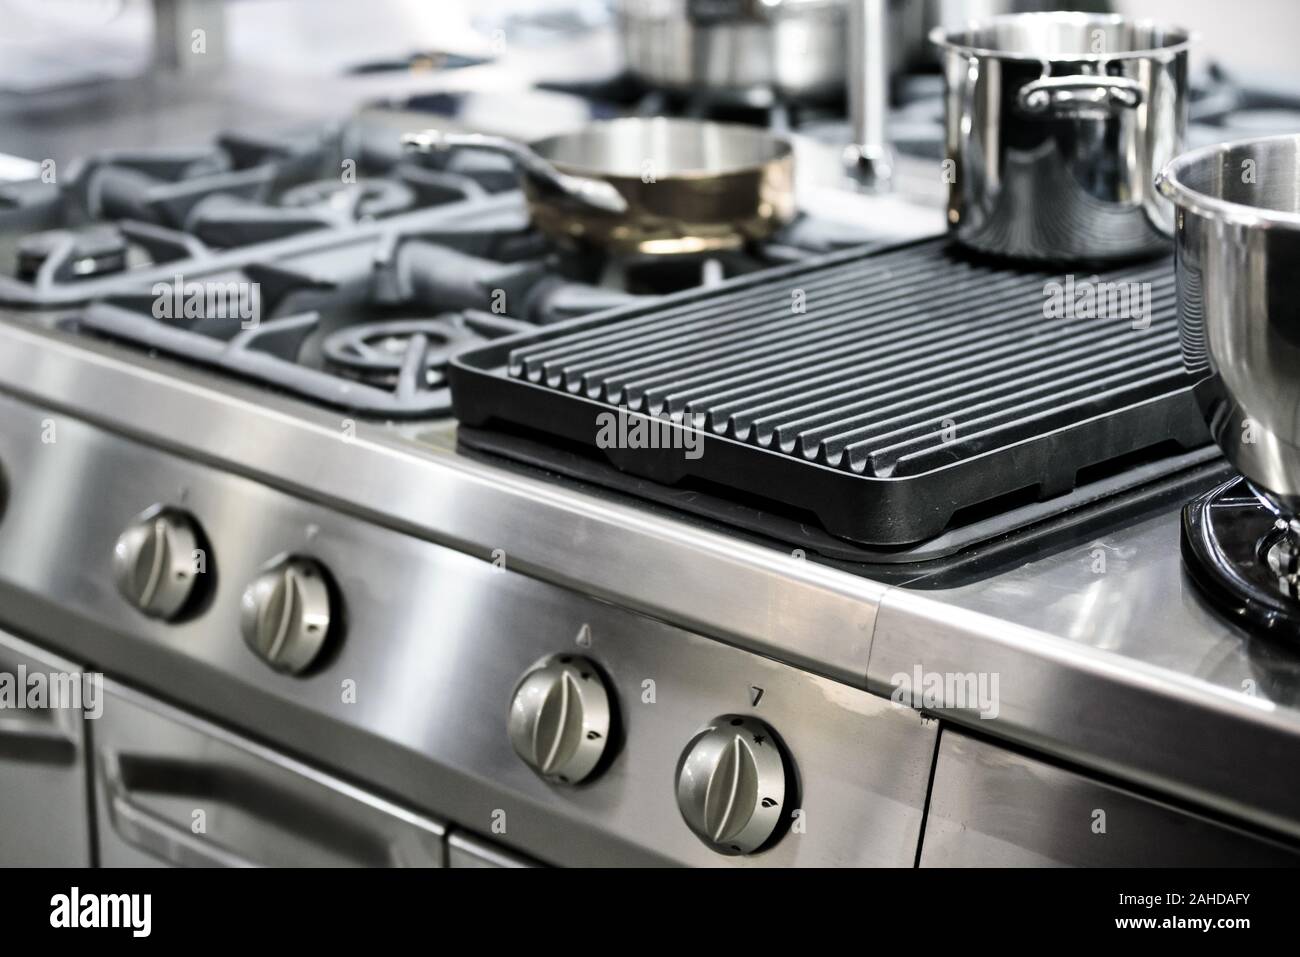 https://c8.alamy.com/comp/2AHDAFY/part-of-a-modern-kitchen-in-the-restaurant-or-hotel-with-professional-equipments-steel-gas-cooker-pots-and-pans-low-dof-2AHDAFY.jpg